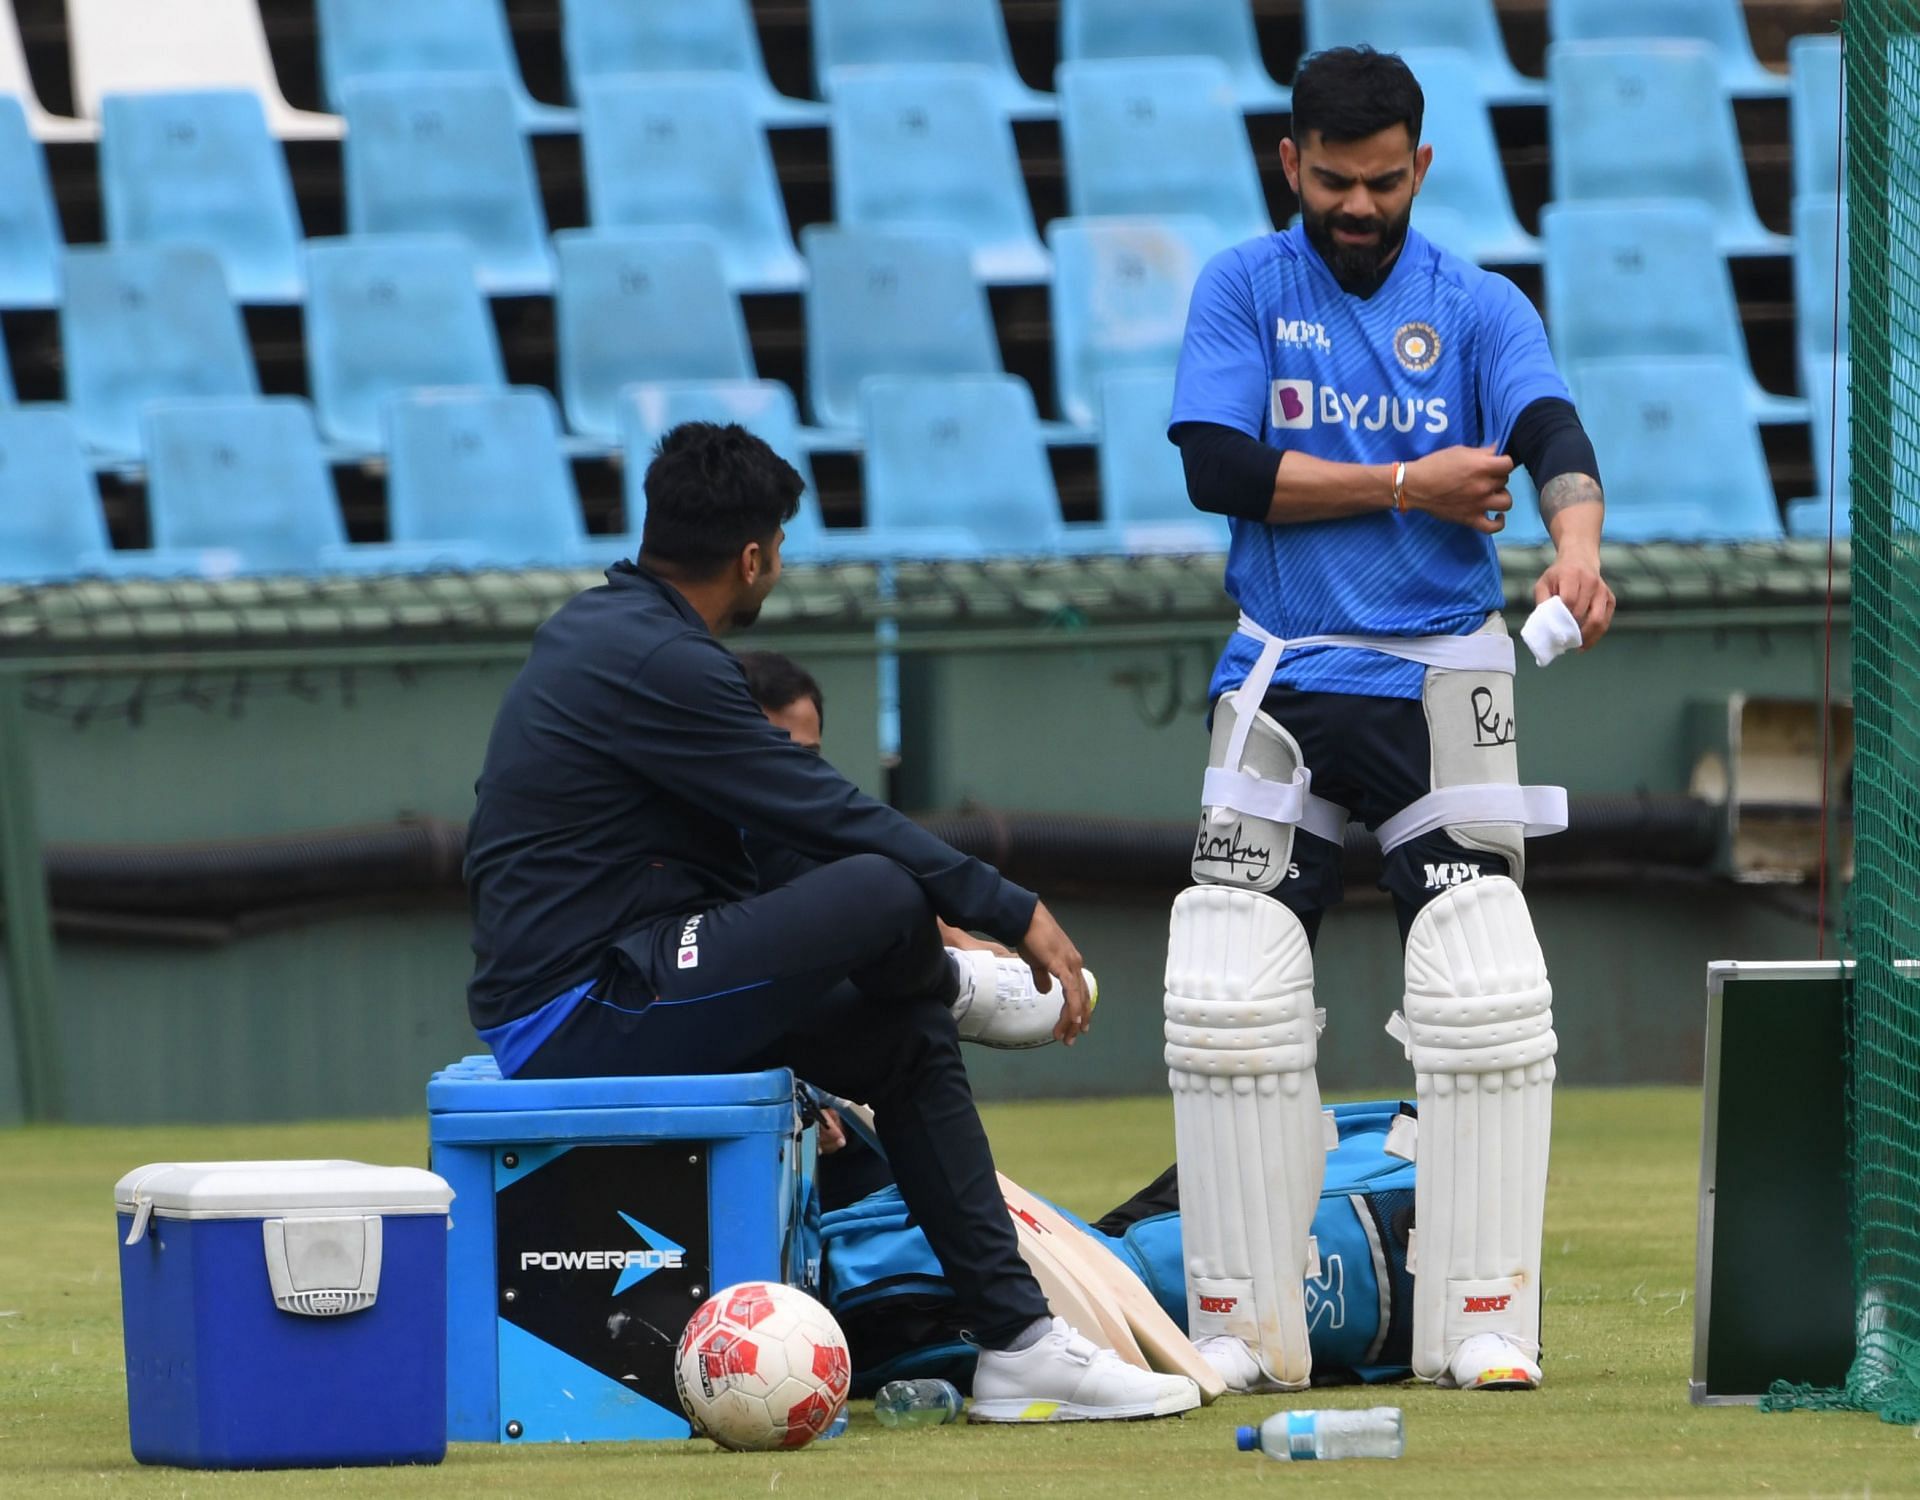 Virat Kohli has been sweating it out in the nets